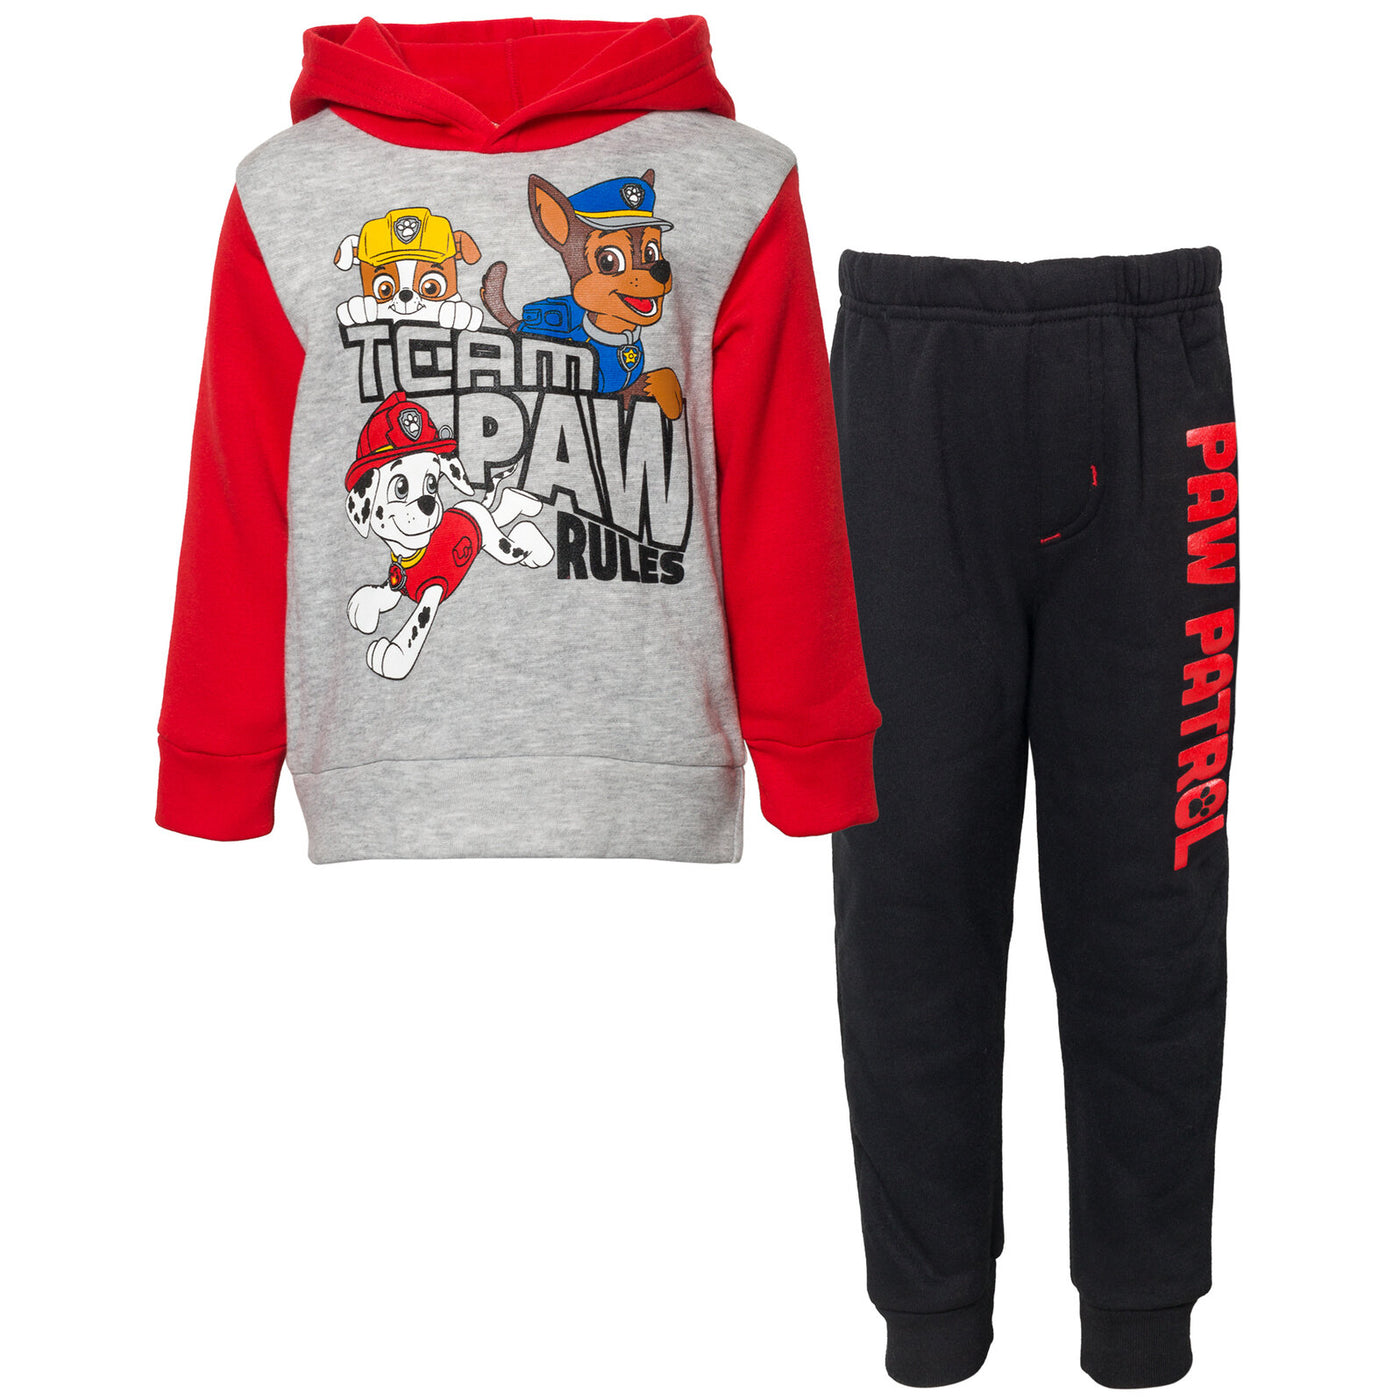 | Clothing and Baby Outfit Set Pullover and Paw Patrol Pants imagikids Kids Fleece Hoodie